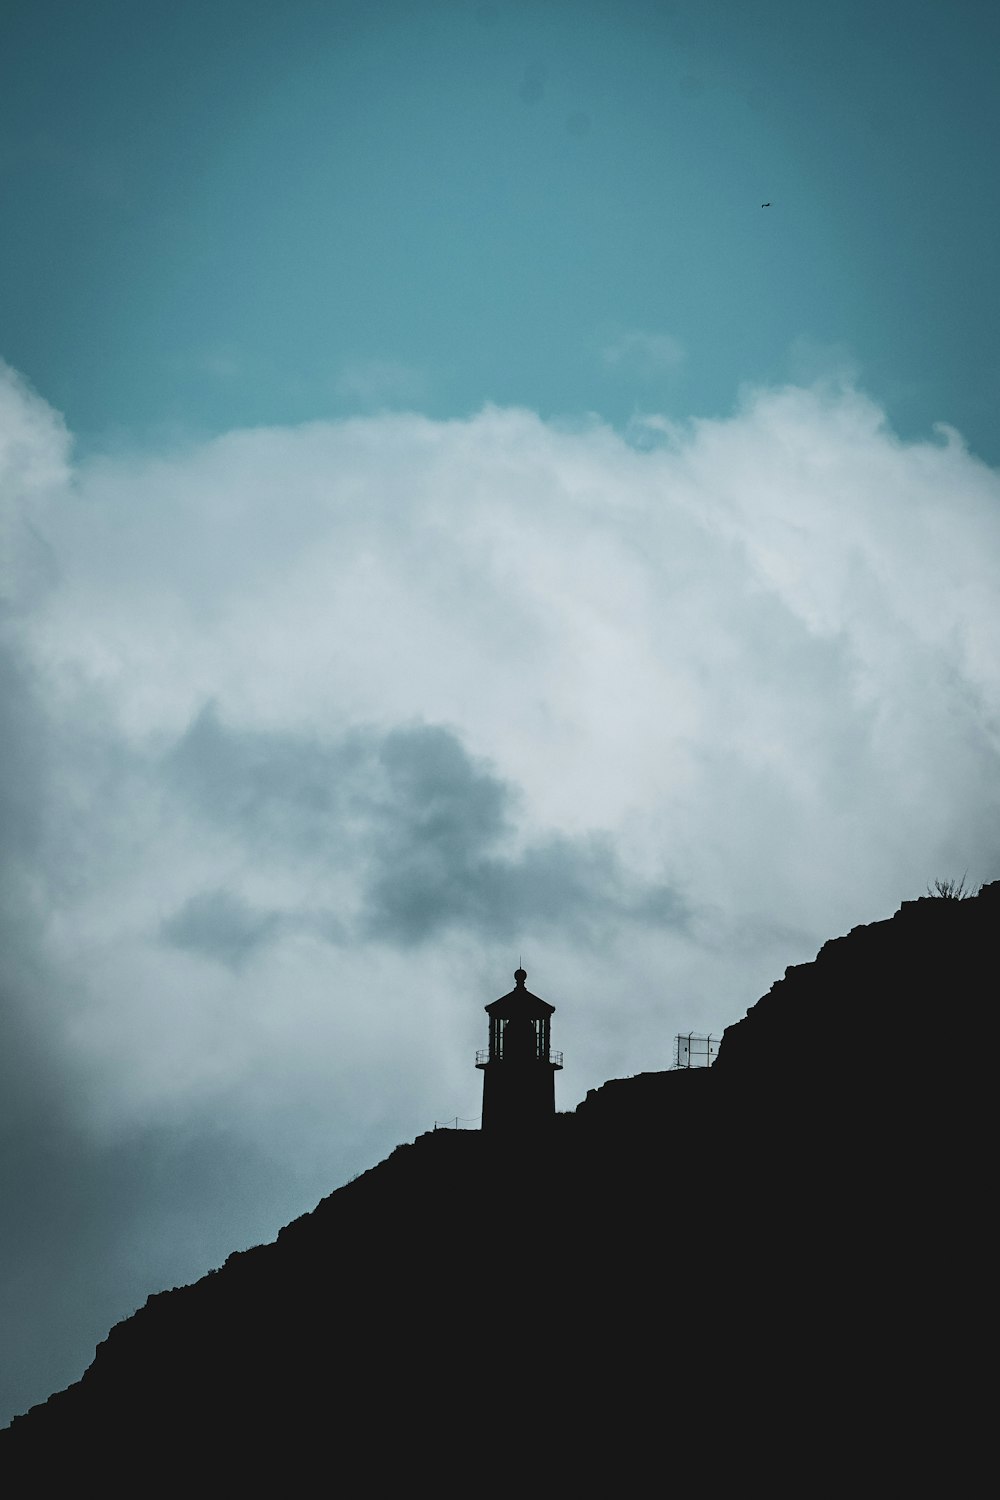 a clock tower on top of a hill under a cloudy sky